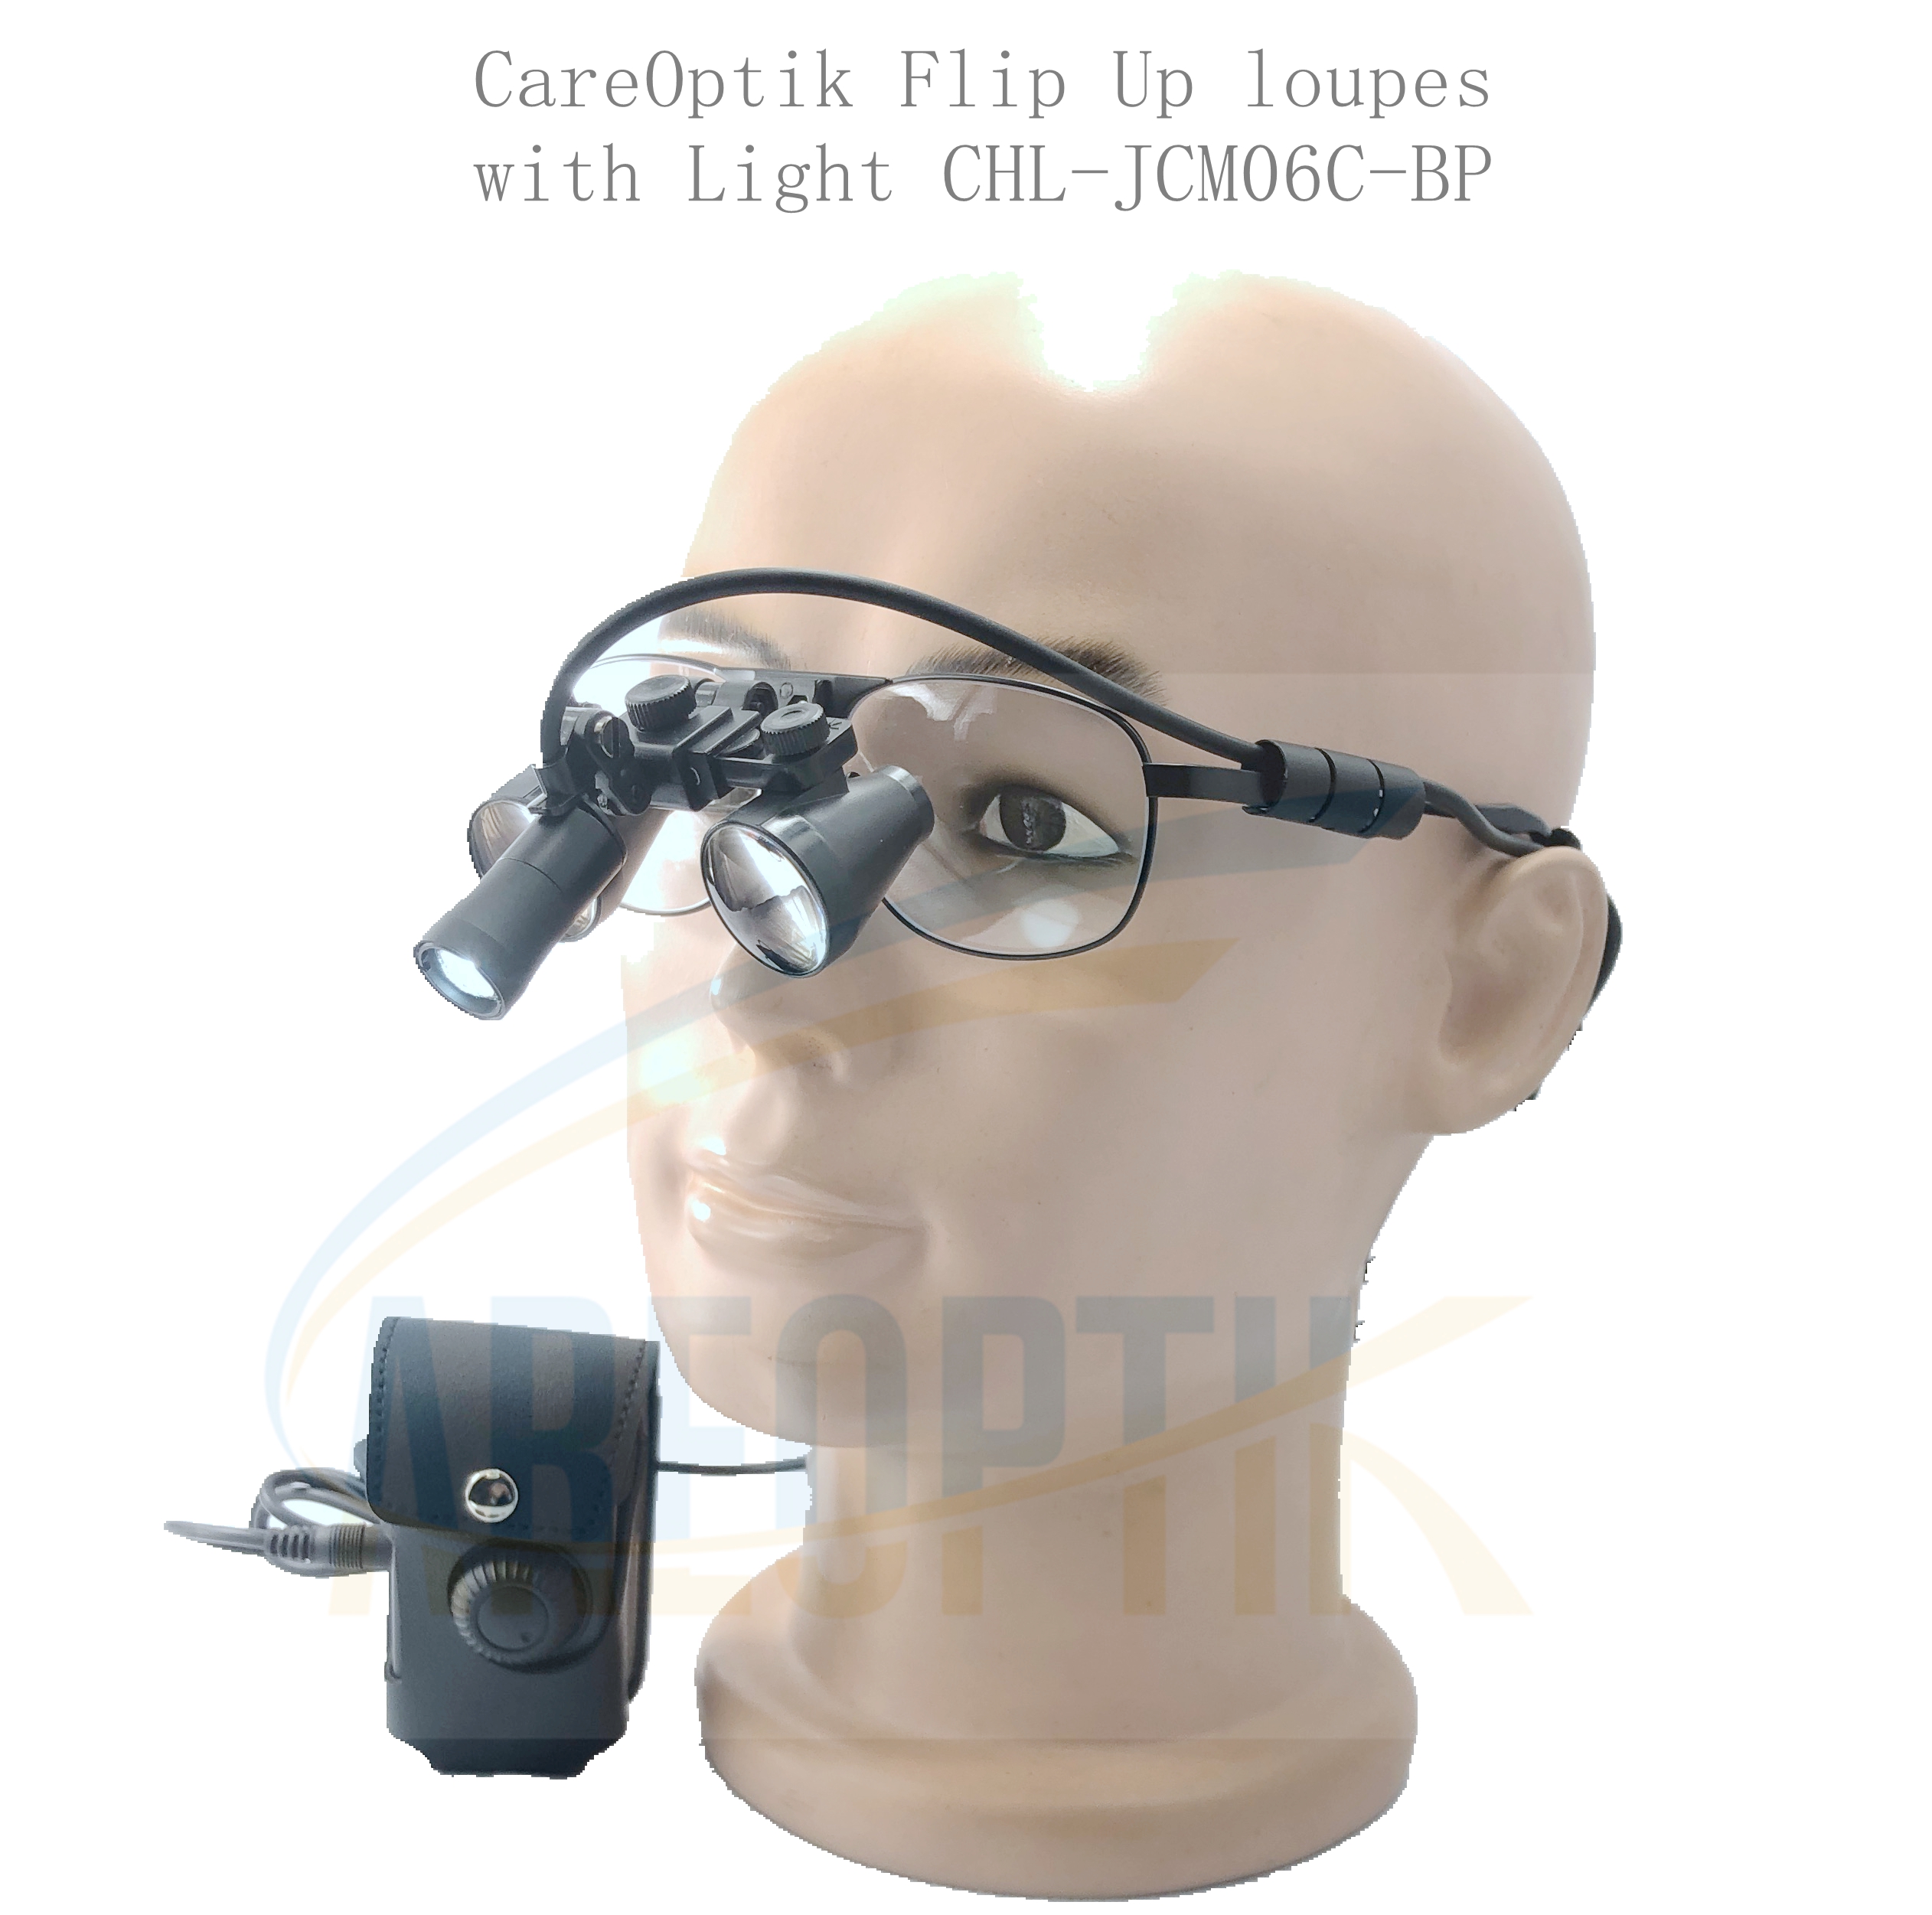 Flip Up dental surgical loupes with lights